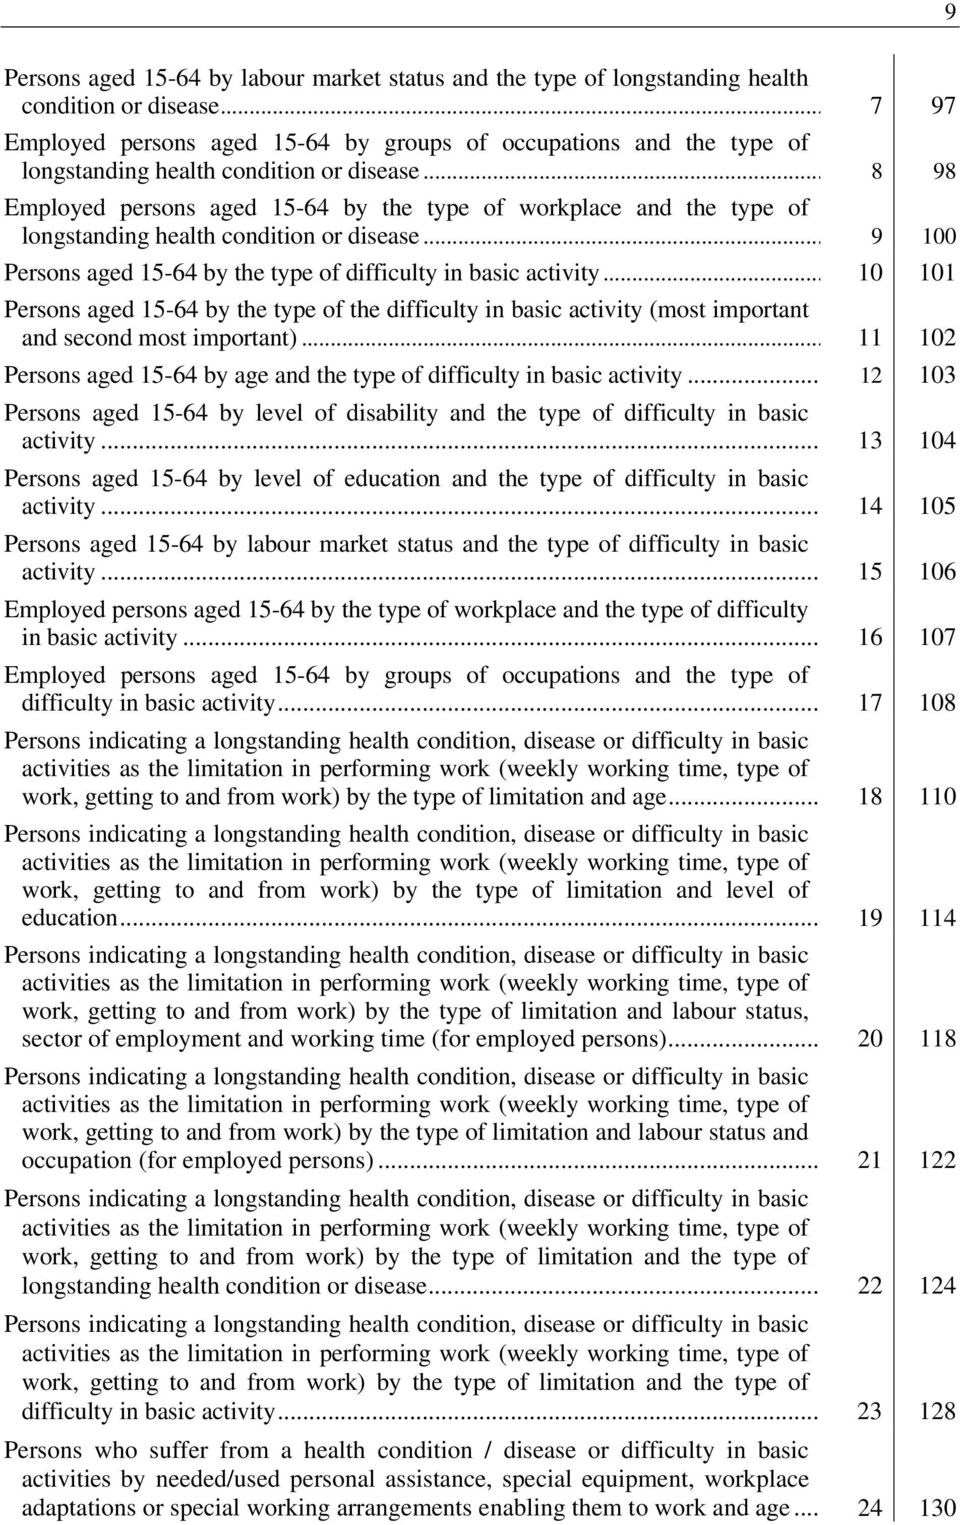 .. 8 98 Employed persons aged 15-64 by the type of workplace and the type of longstanding health condition or disease... 9 100 Persons aged 15-64 by the type of difficulty in basic activity.